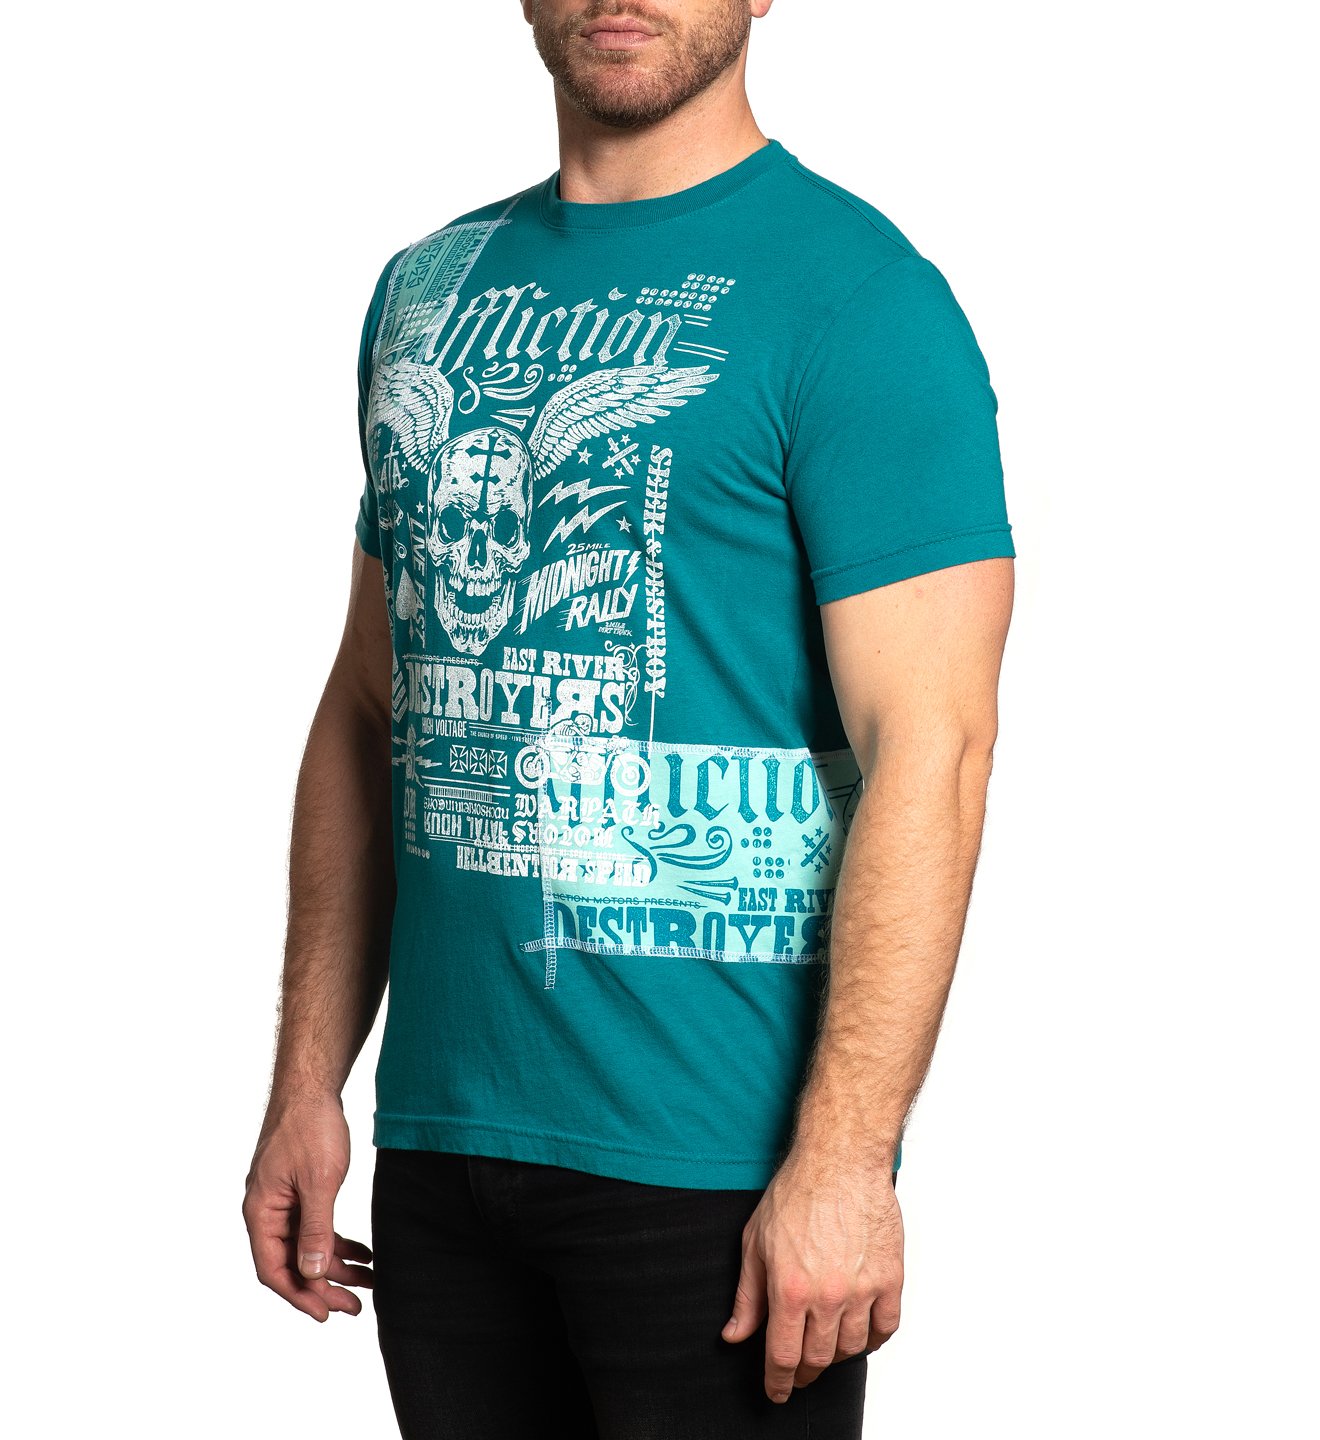 Cali Outlaws - Affliction Clothing